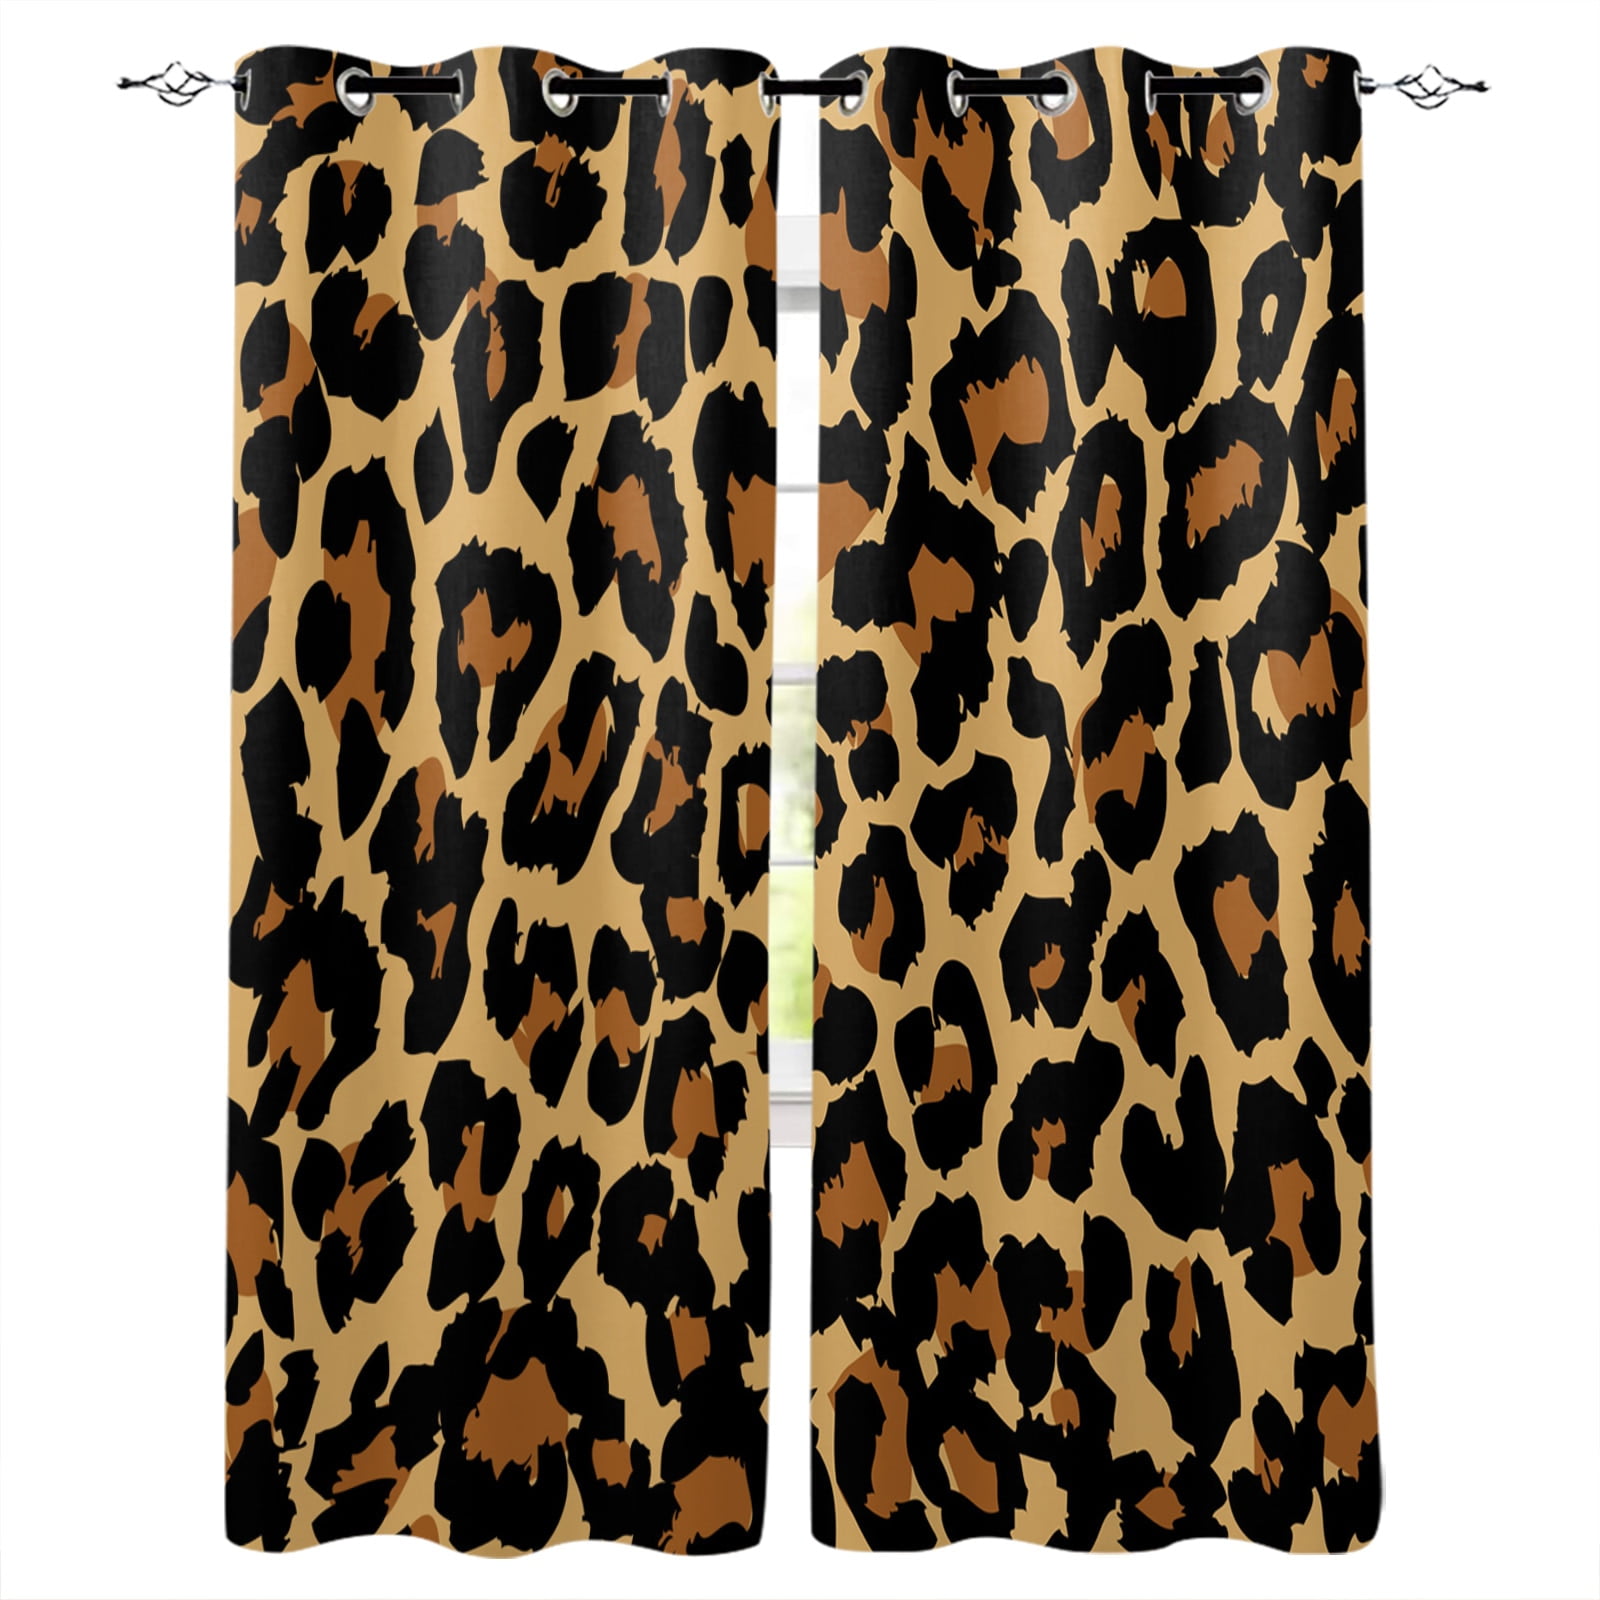 Animal Skin Texture Leopard Print Window Curtains for Living Room ...